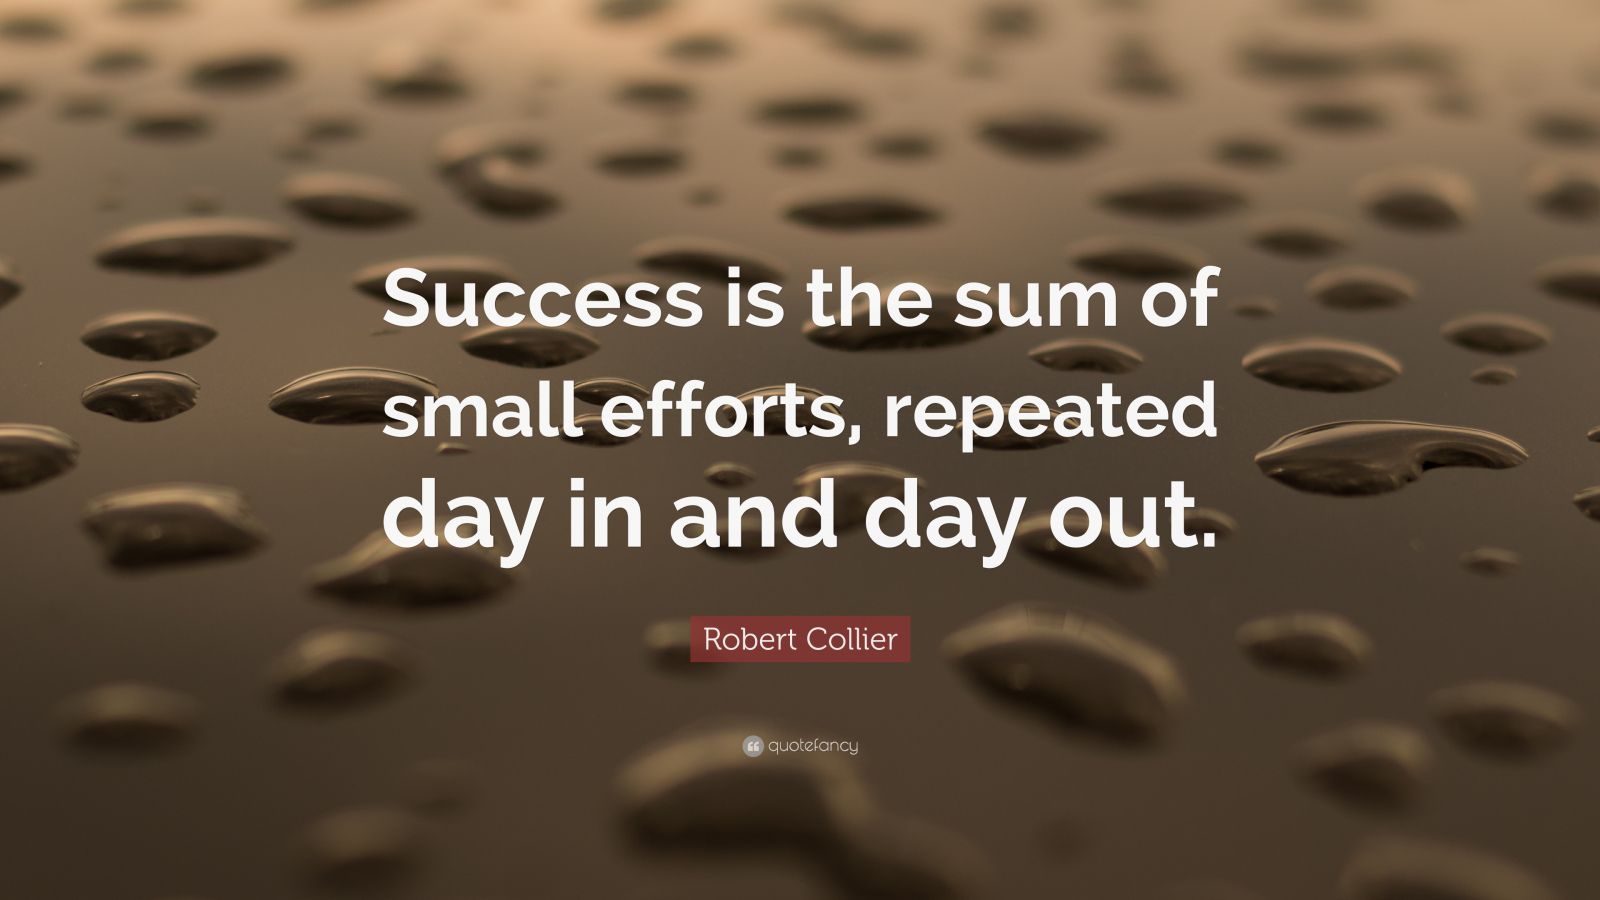 Robert Collier Quote: “Success is the sum of small efforts, repeated